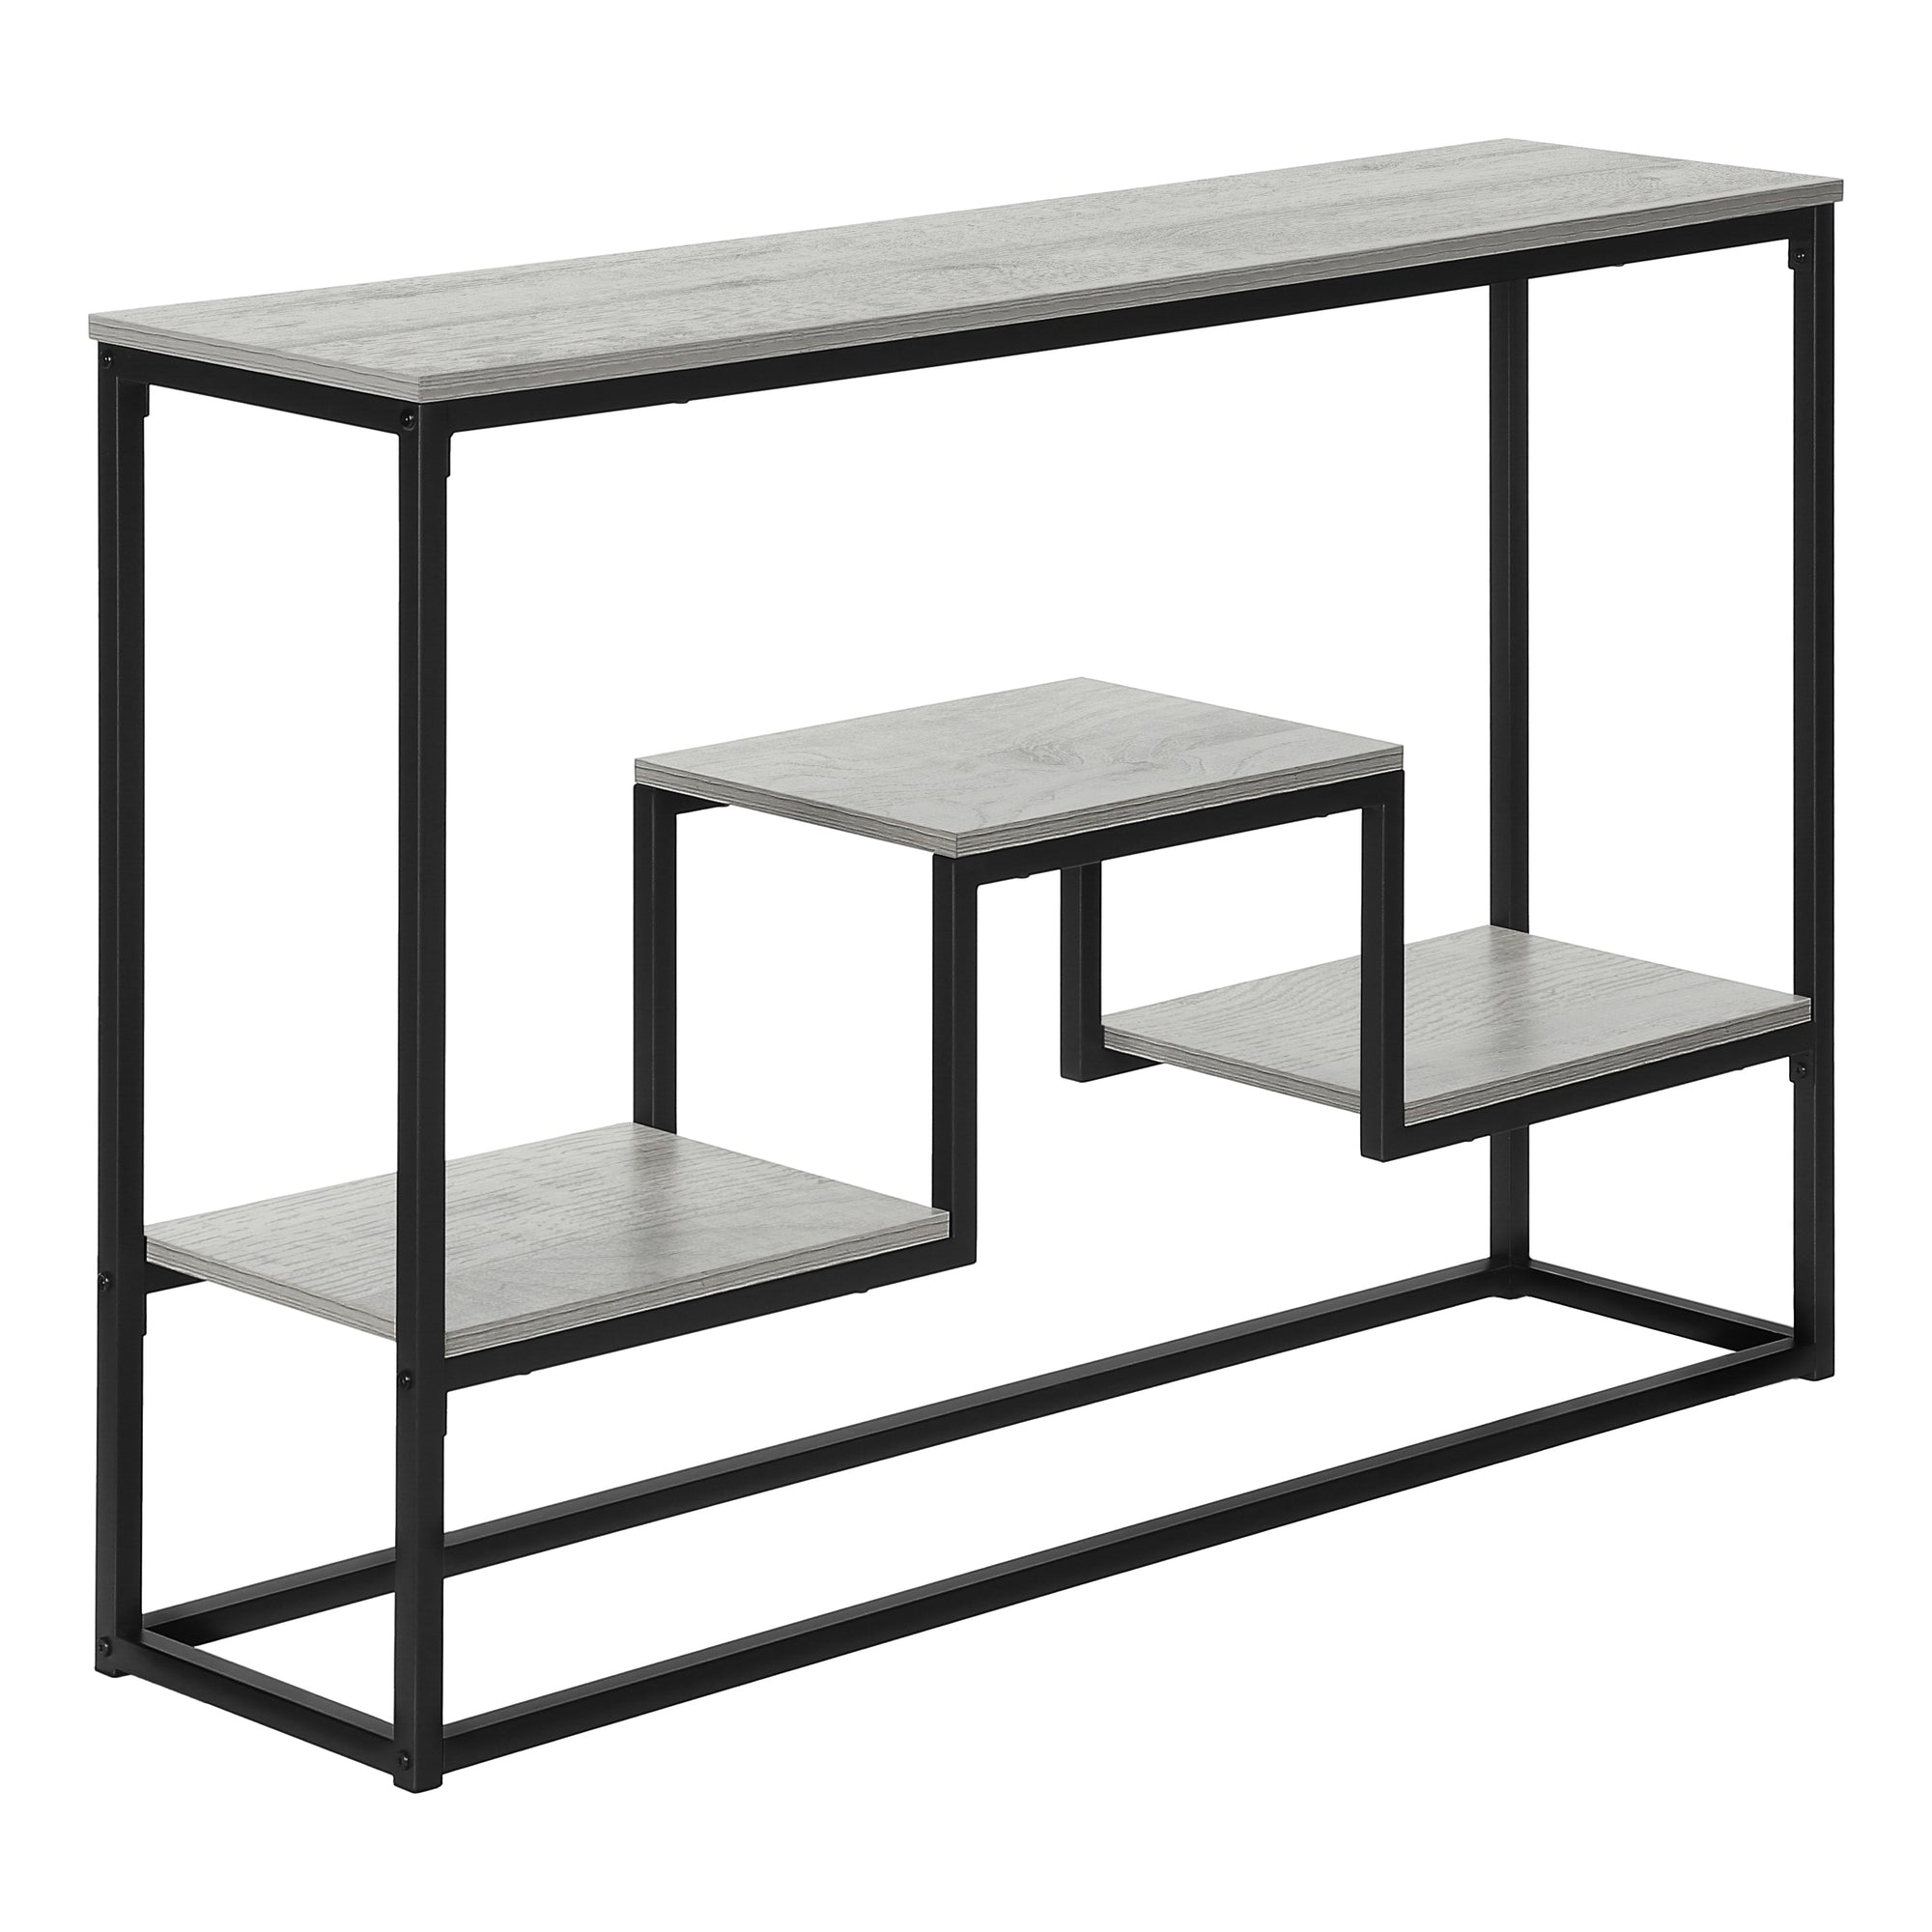 MN-433580    Accent Table, Console, Entryway, Narrow, Sofa, Living Room, Bedroom, Metal Frame, Laminate, Grey, Black, Contemporary, Modern